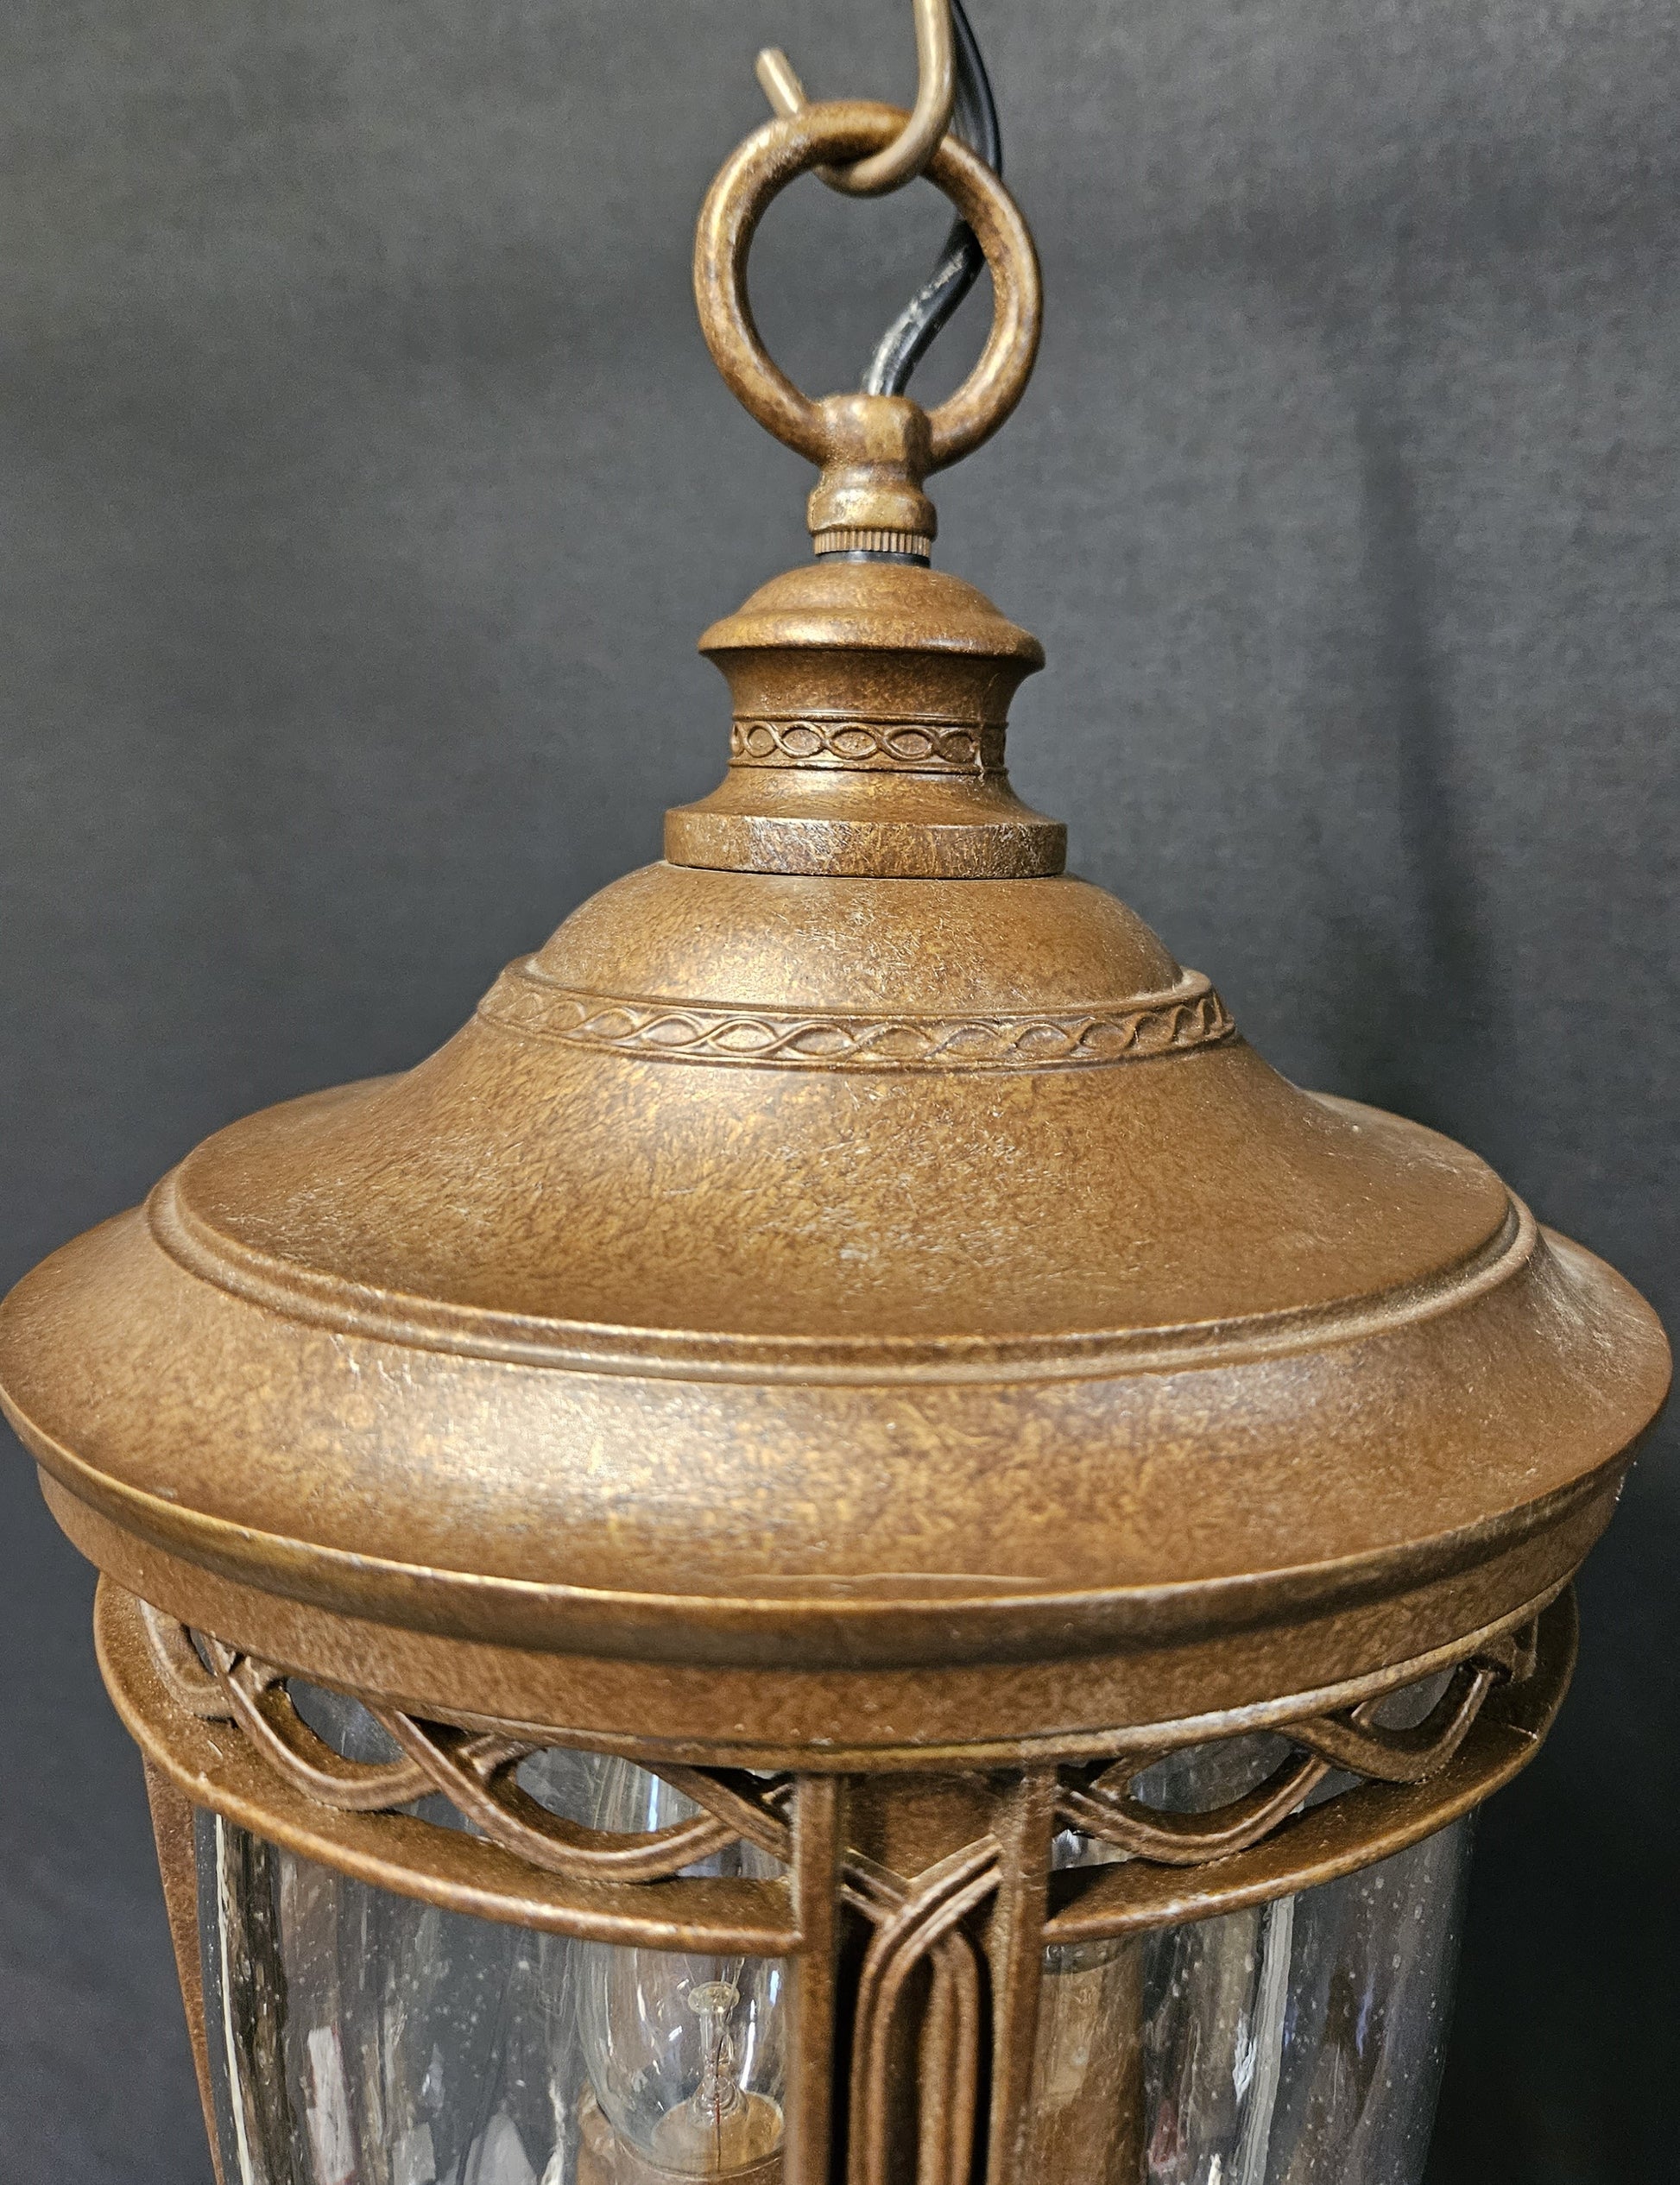 view of top lid of lantern